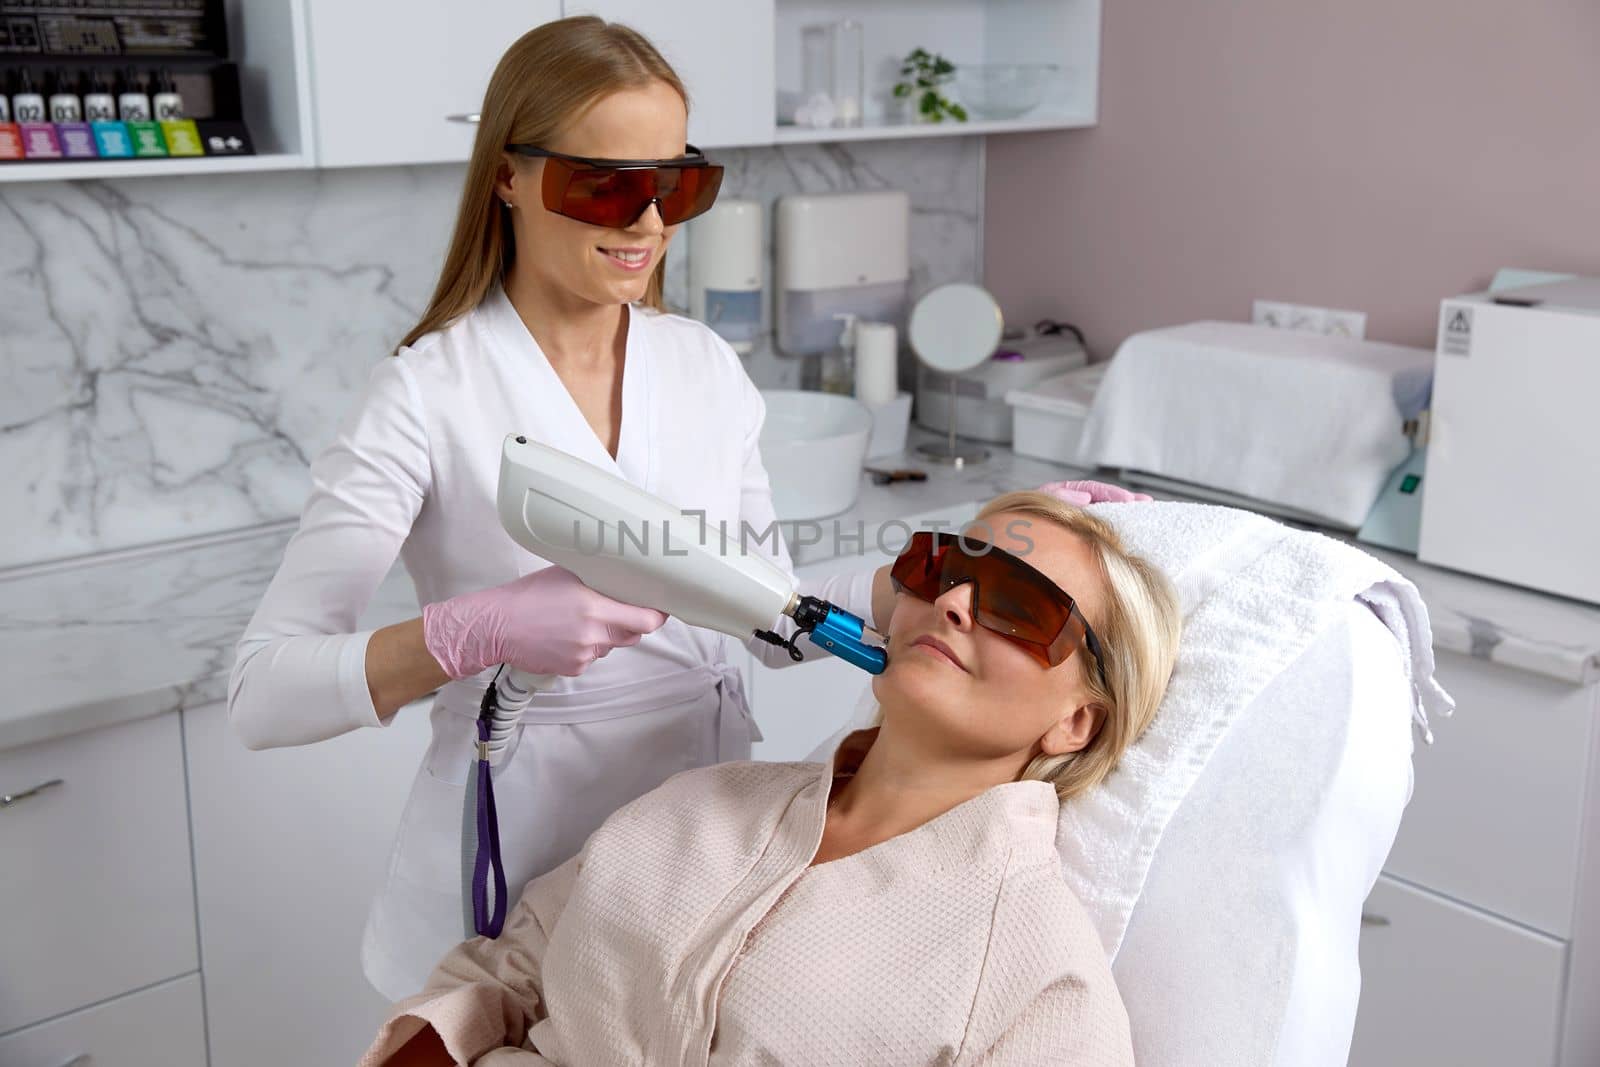 Woman receiving laser treatment in cosmetology clinic by Mariakray